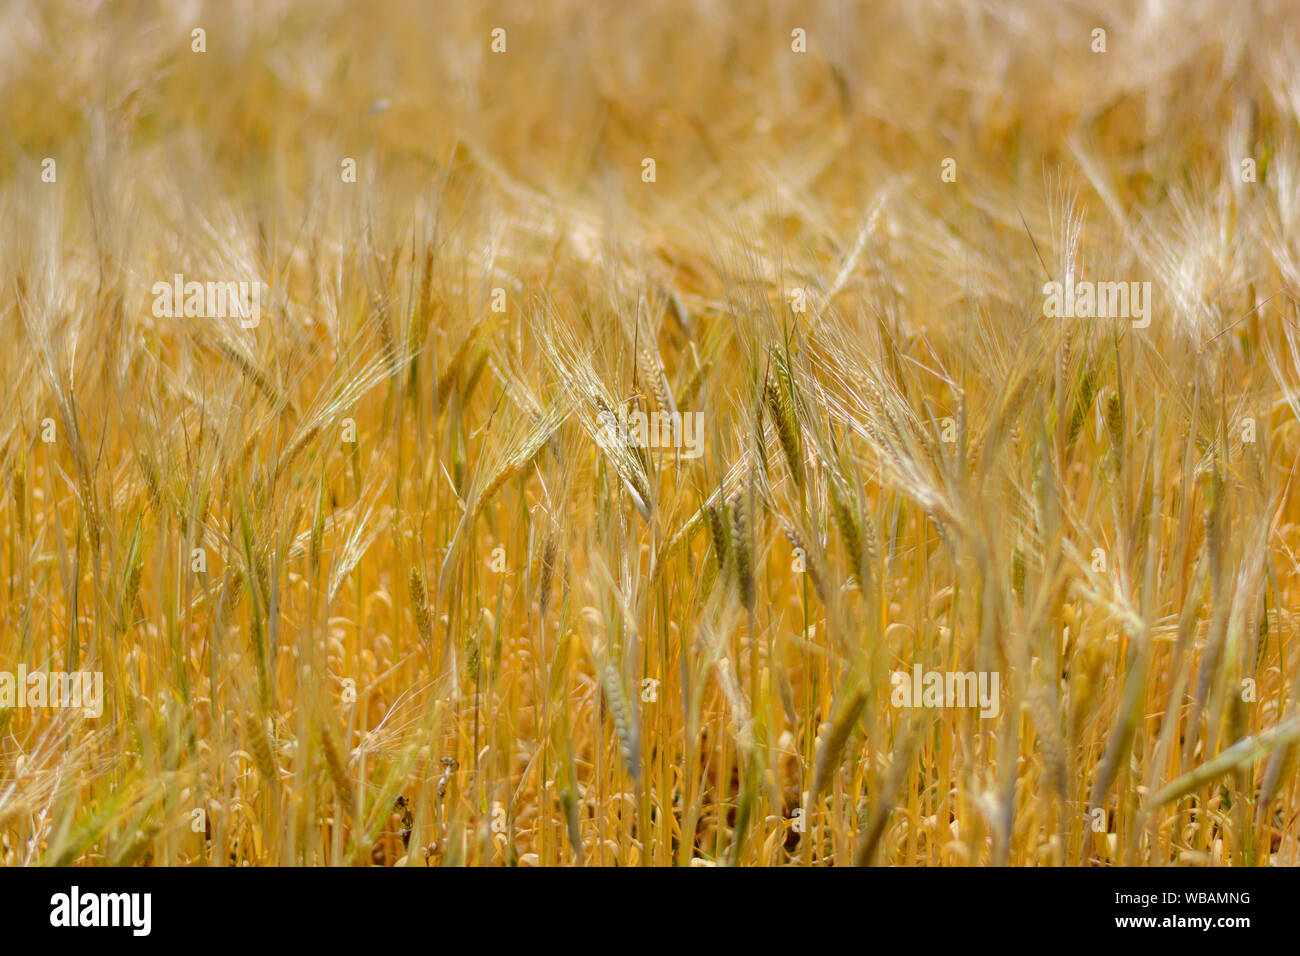 Outdoor golden grain  on a hot summer sunny day with blurry background Stock Photo